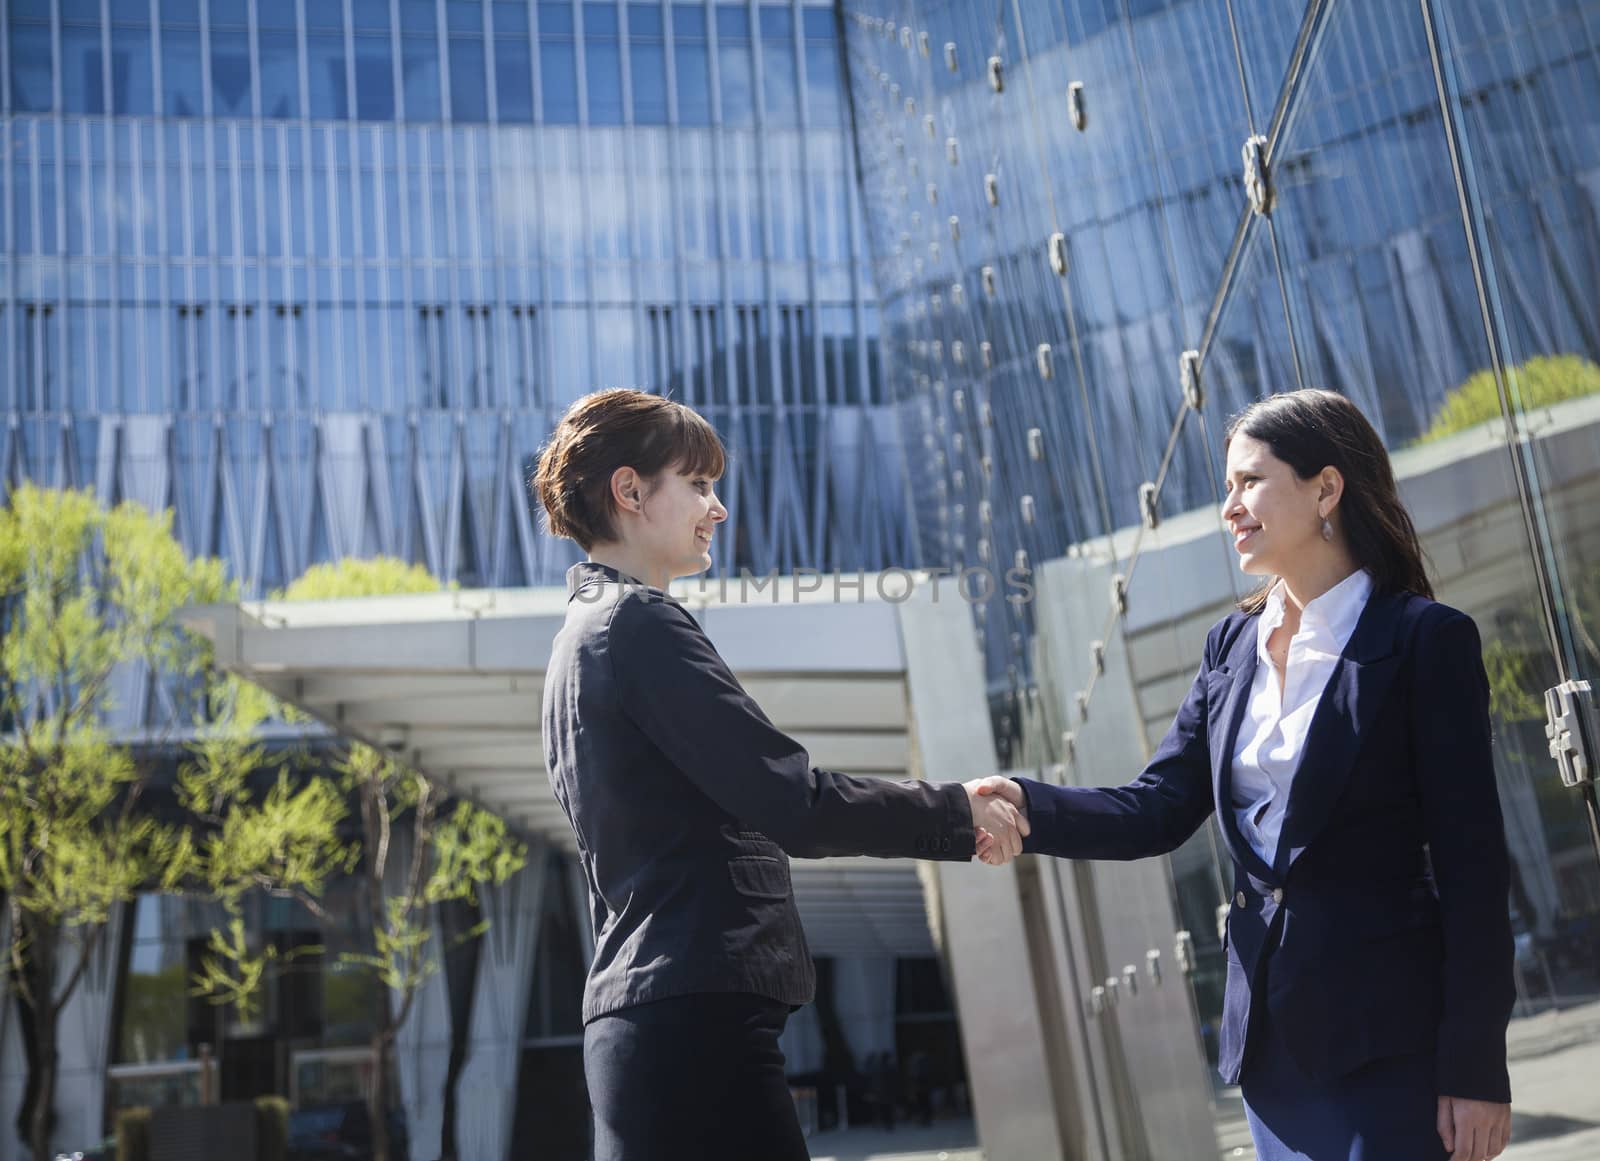 Two smiling young businesswomen shaking hands outdoors in Beijing, China